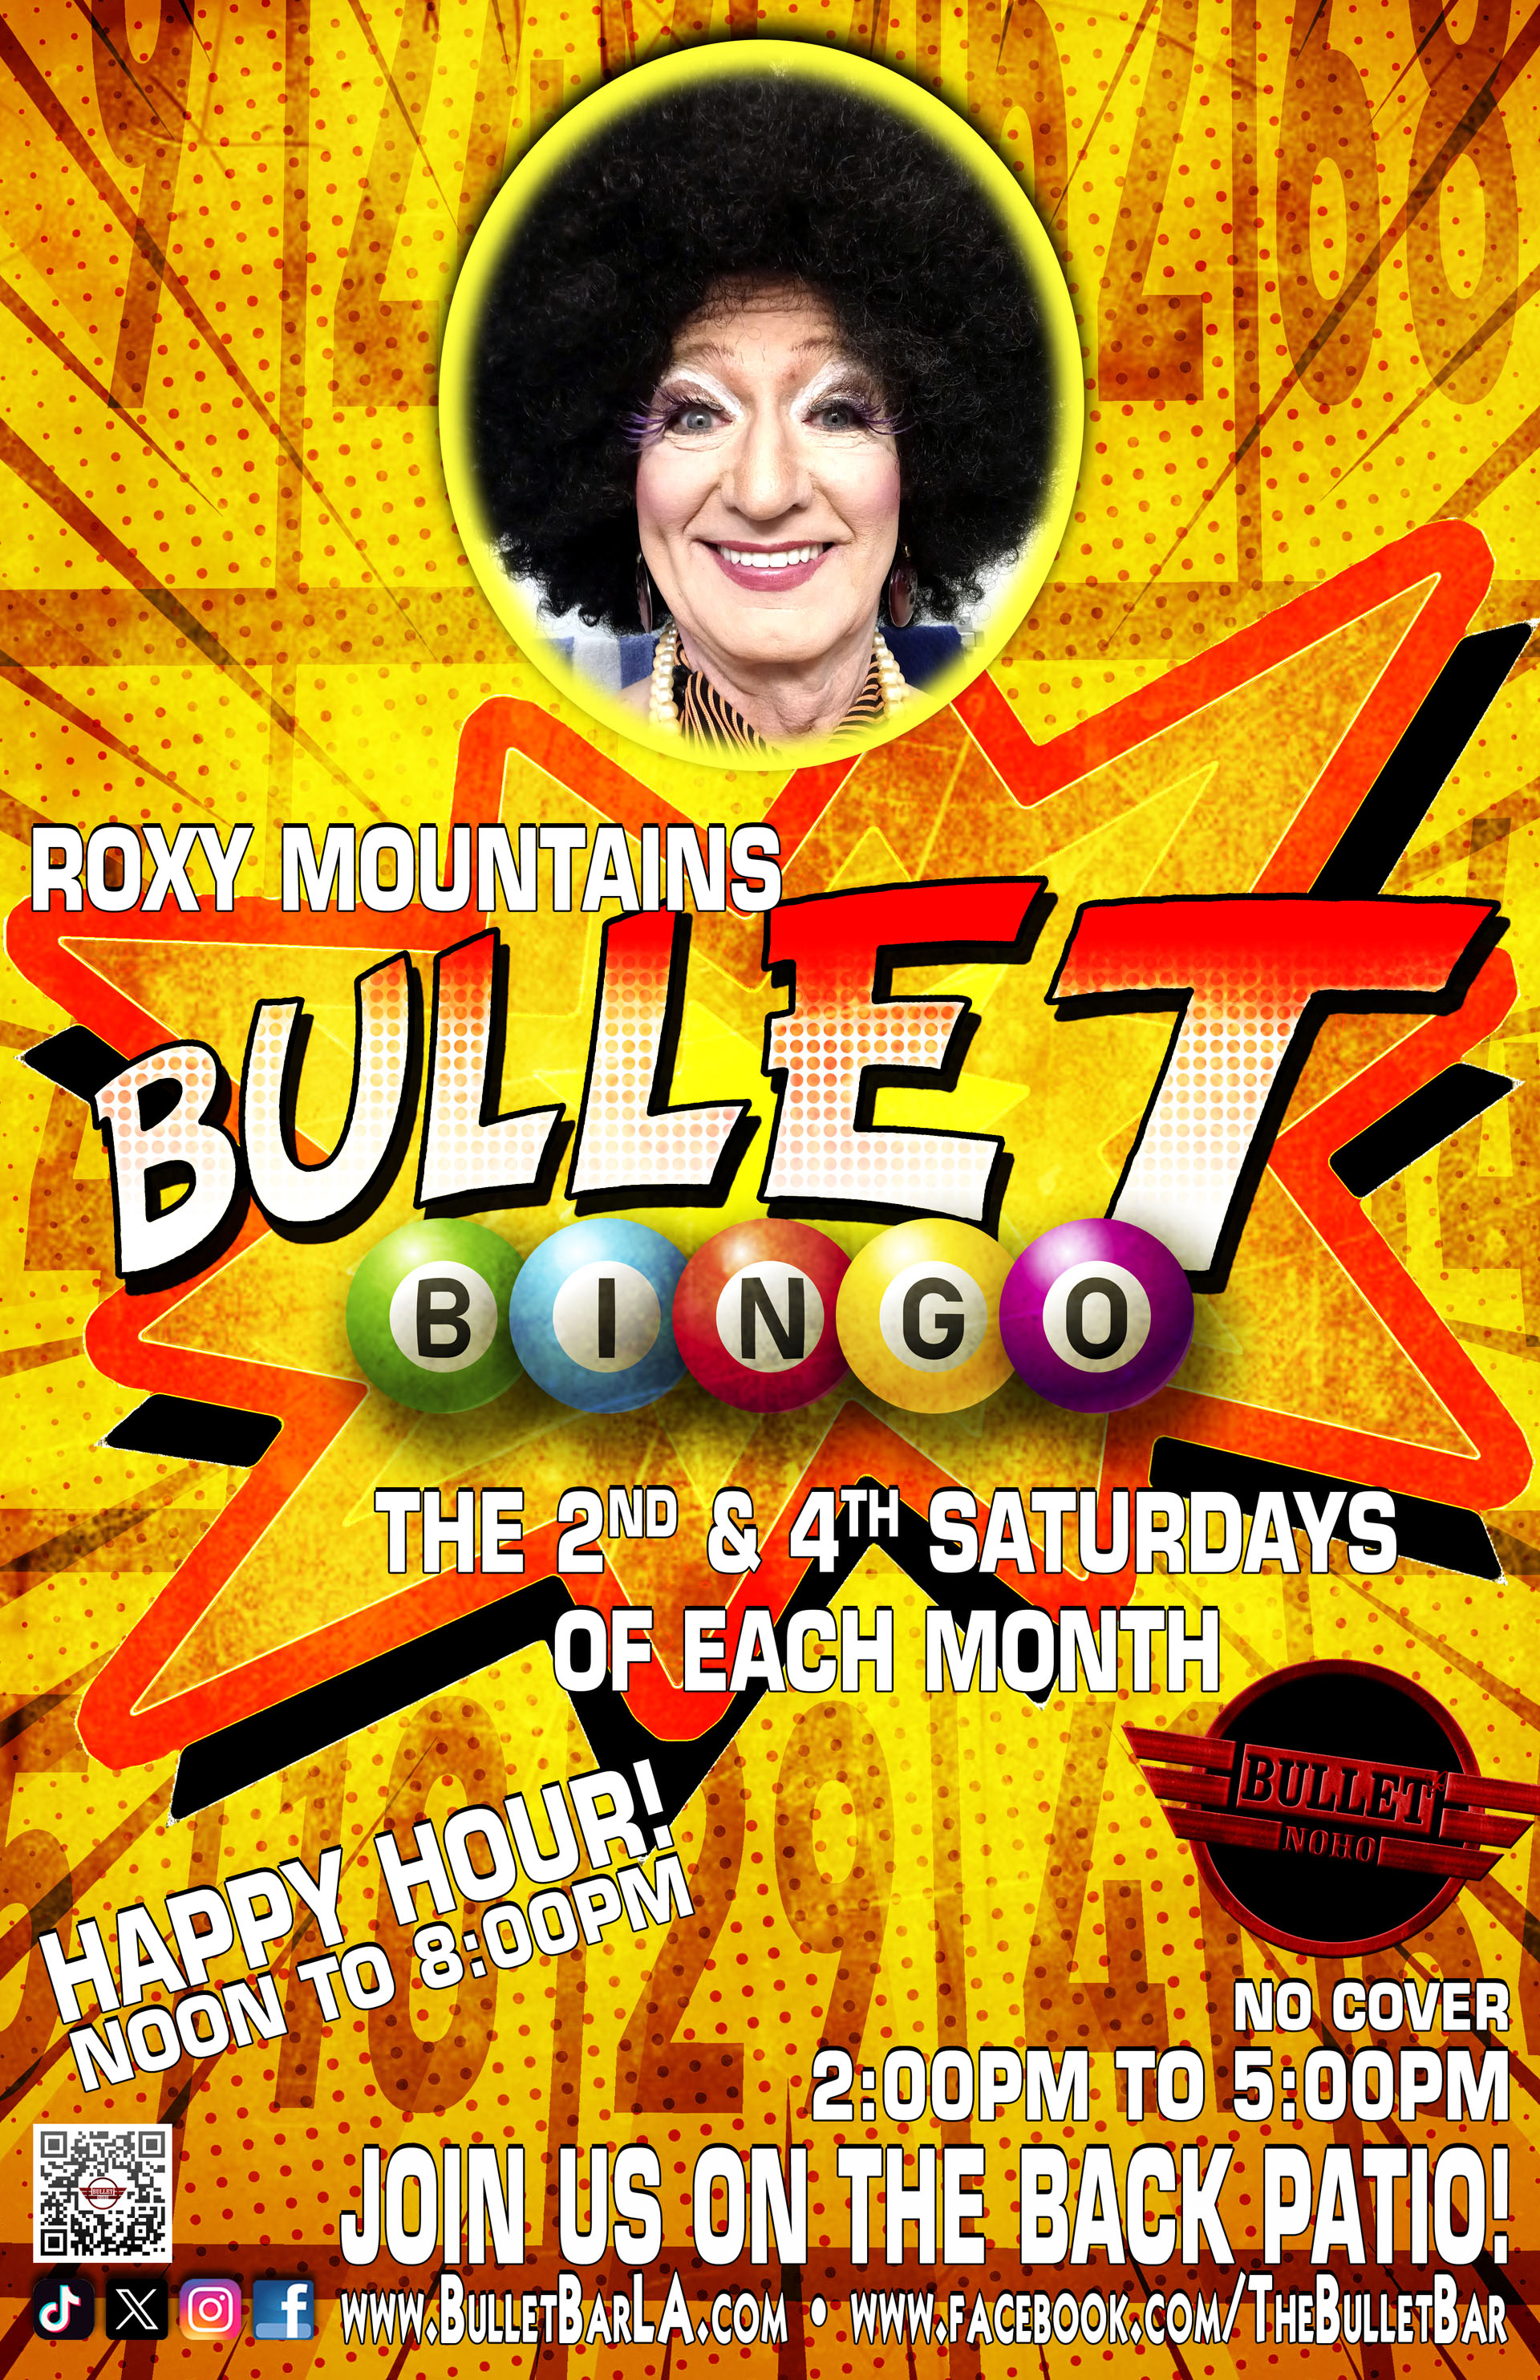 The Bullet Bar Presents BULLET BINGO with ROXY MOUNTAINS: The 2ND & 4TH Saturdays of the month, 2:00 PM to 5:00 PM on our back patio! Featuring HAPPY HOUR PRICING! No cover.